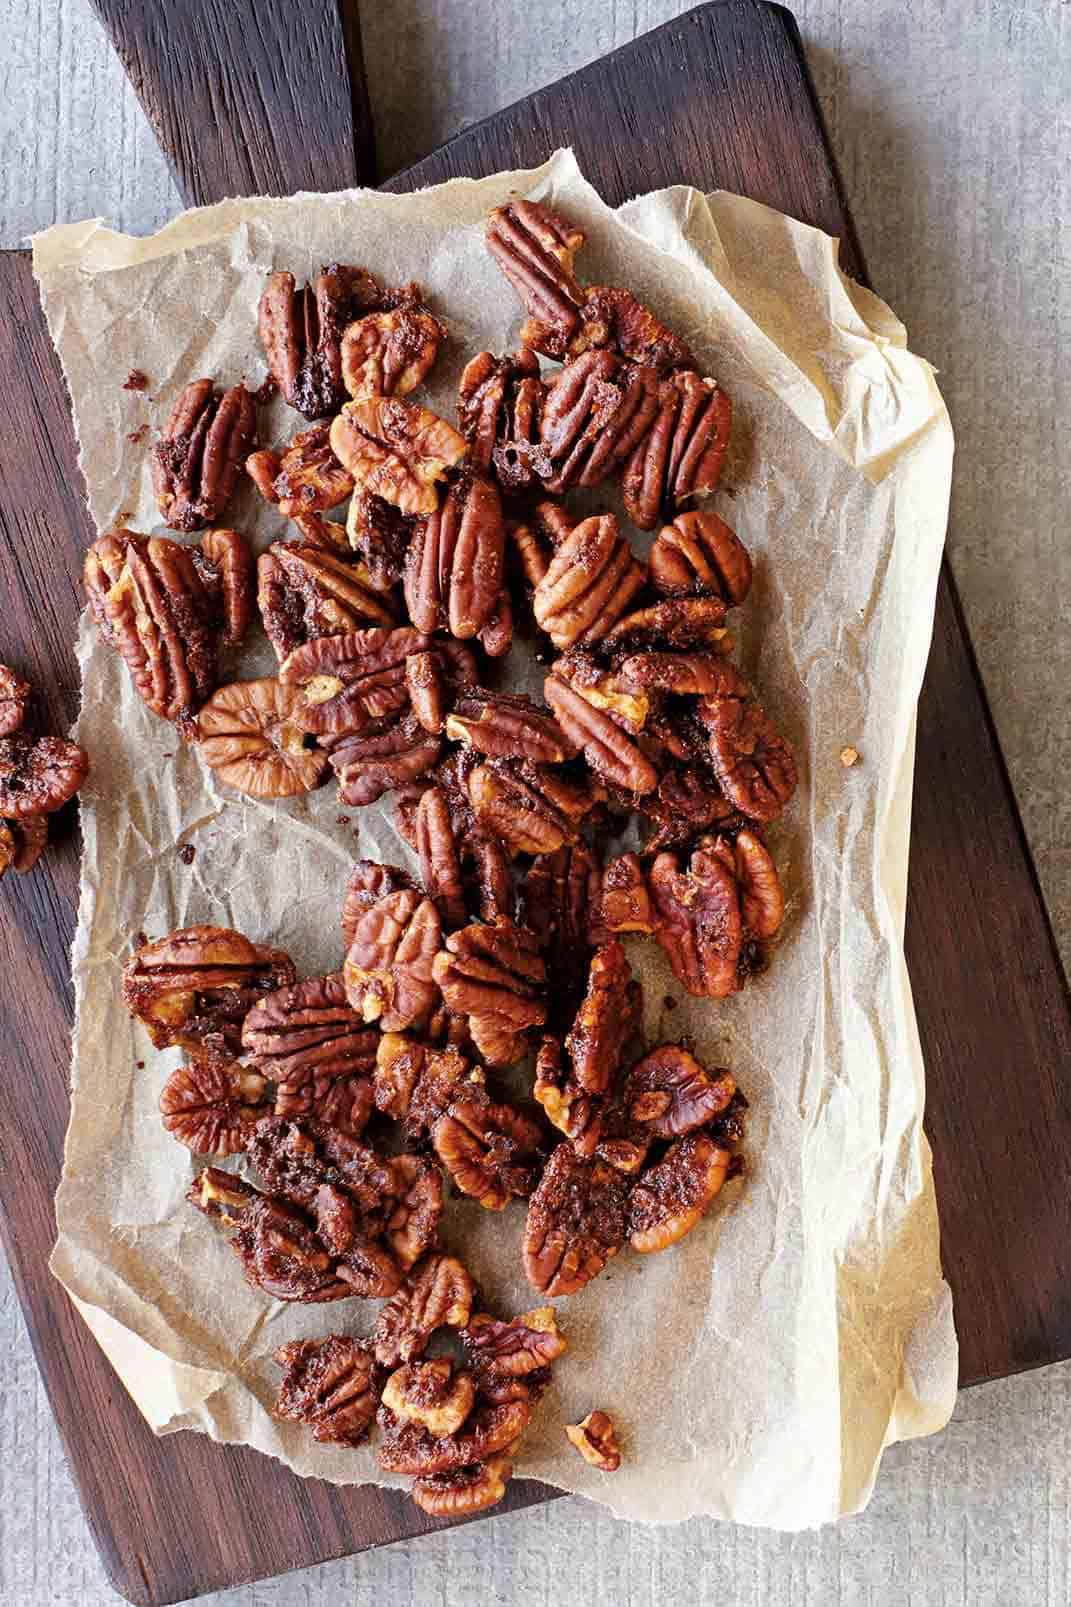 Fragrant and Spiced Pecans